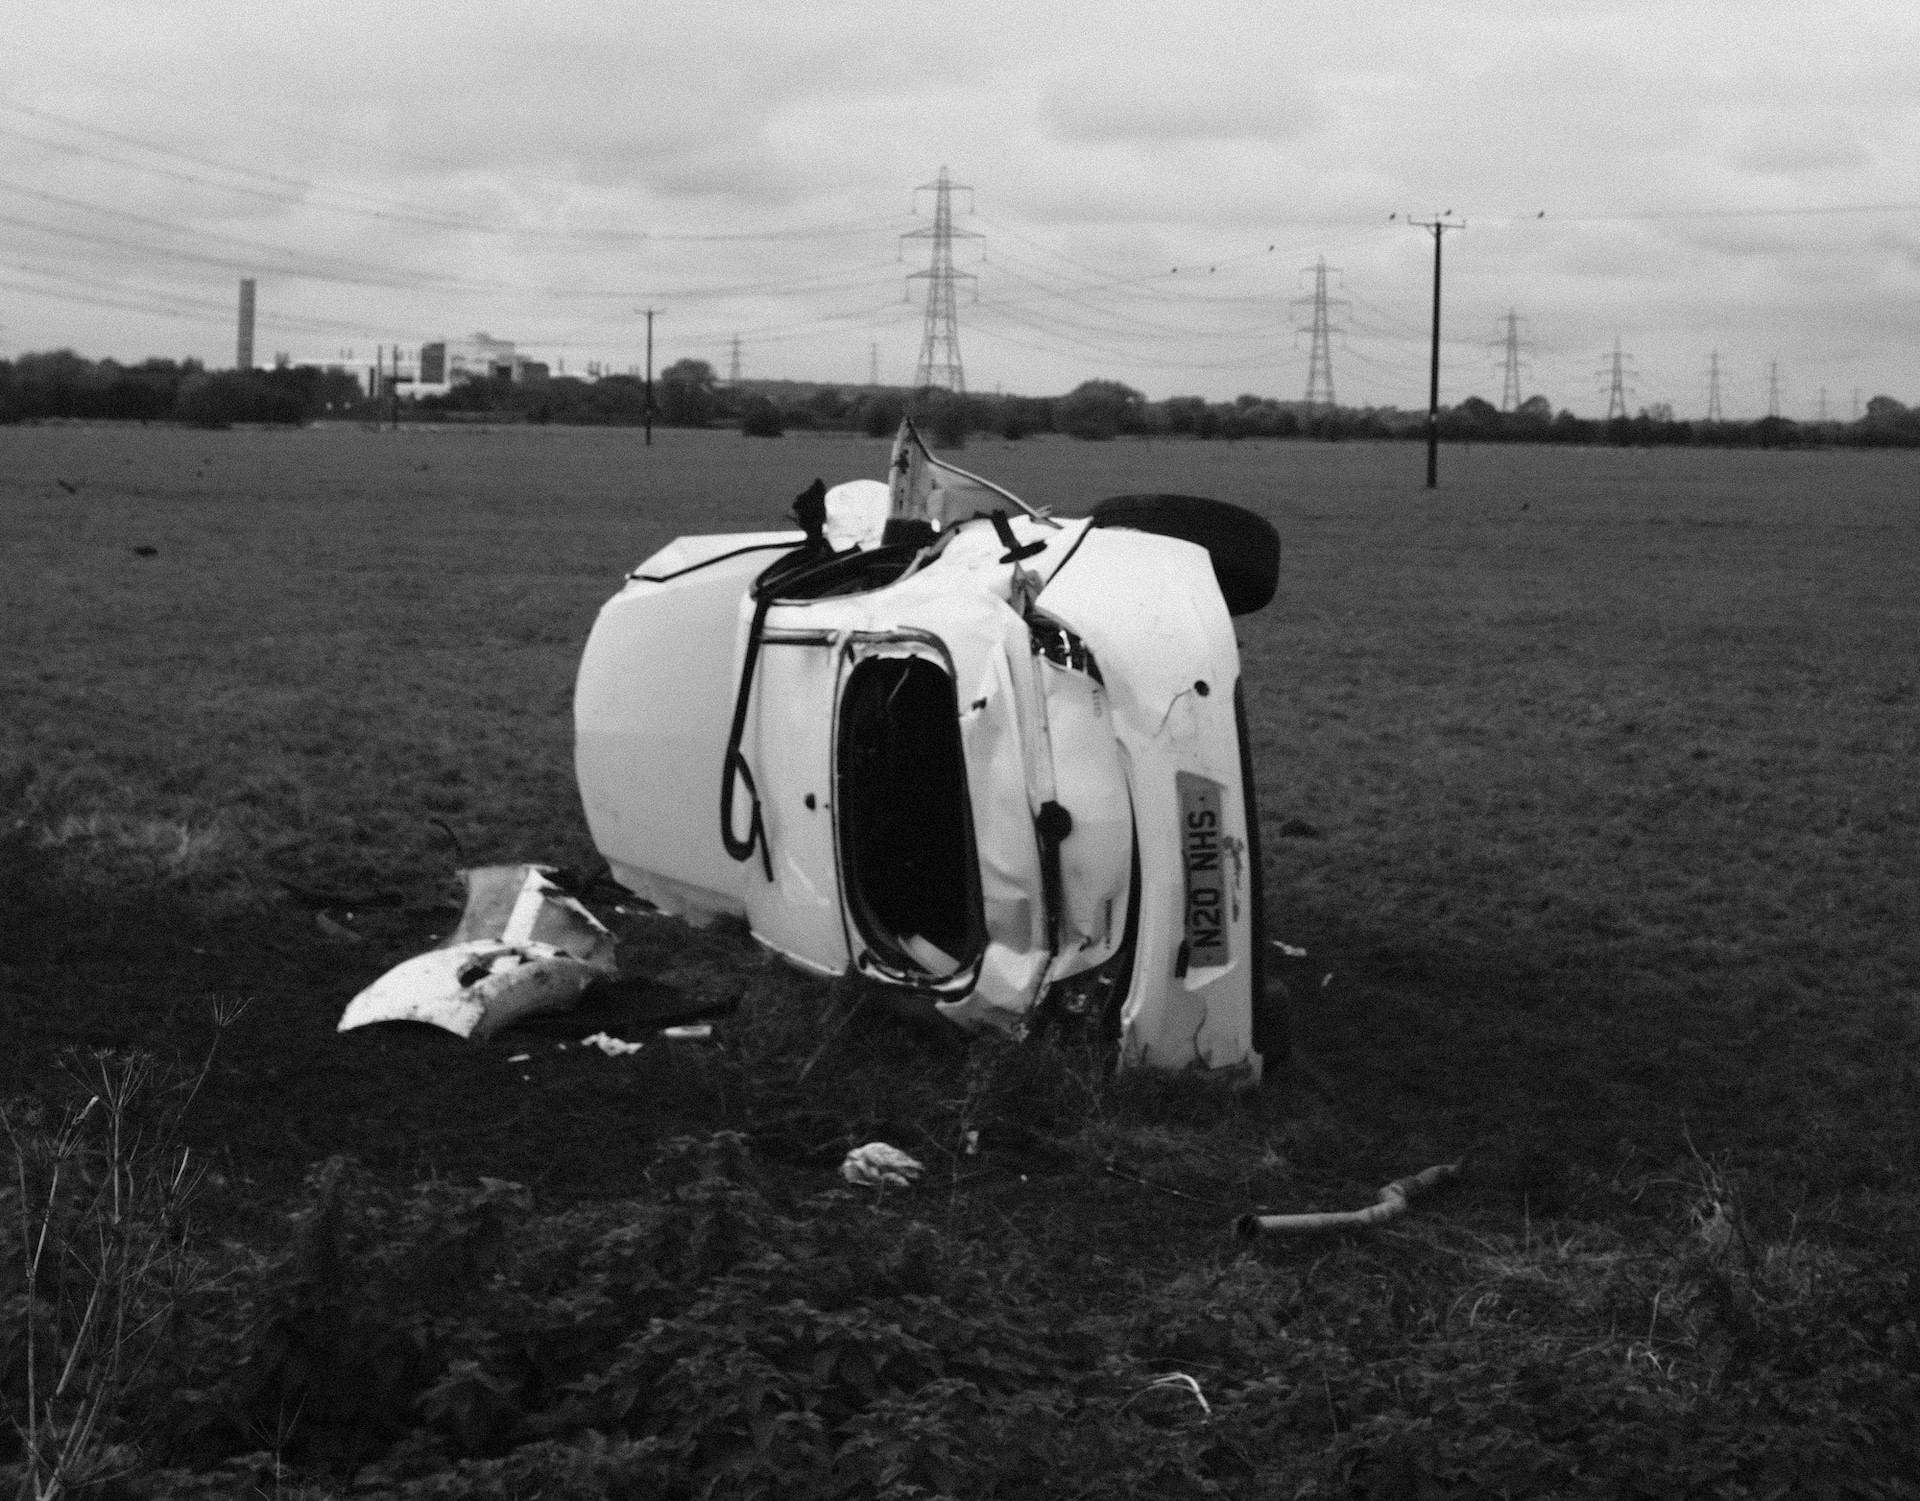 A car overturned on a field